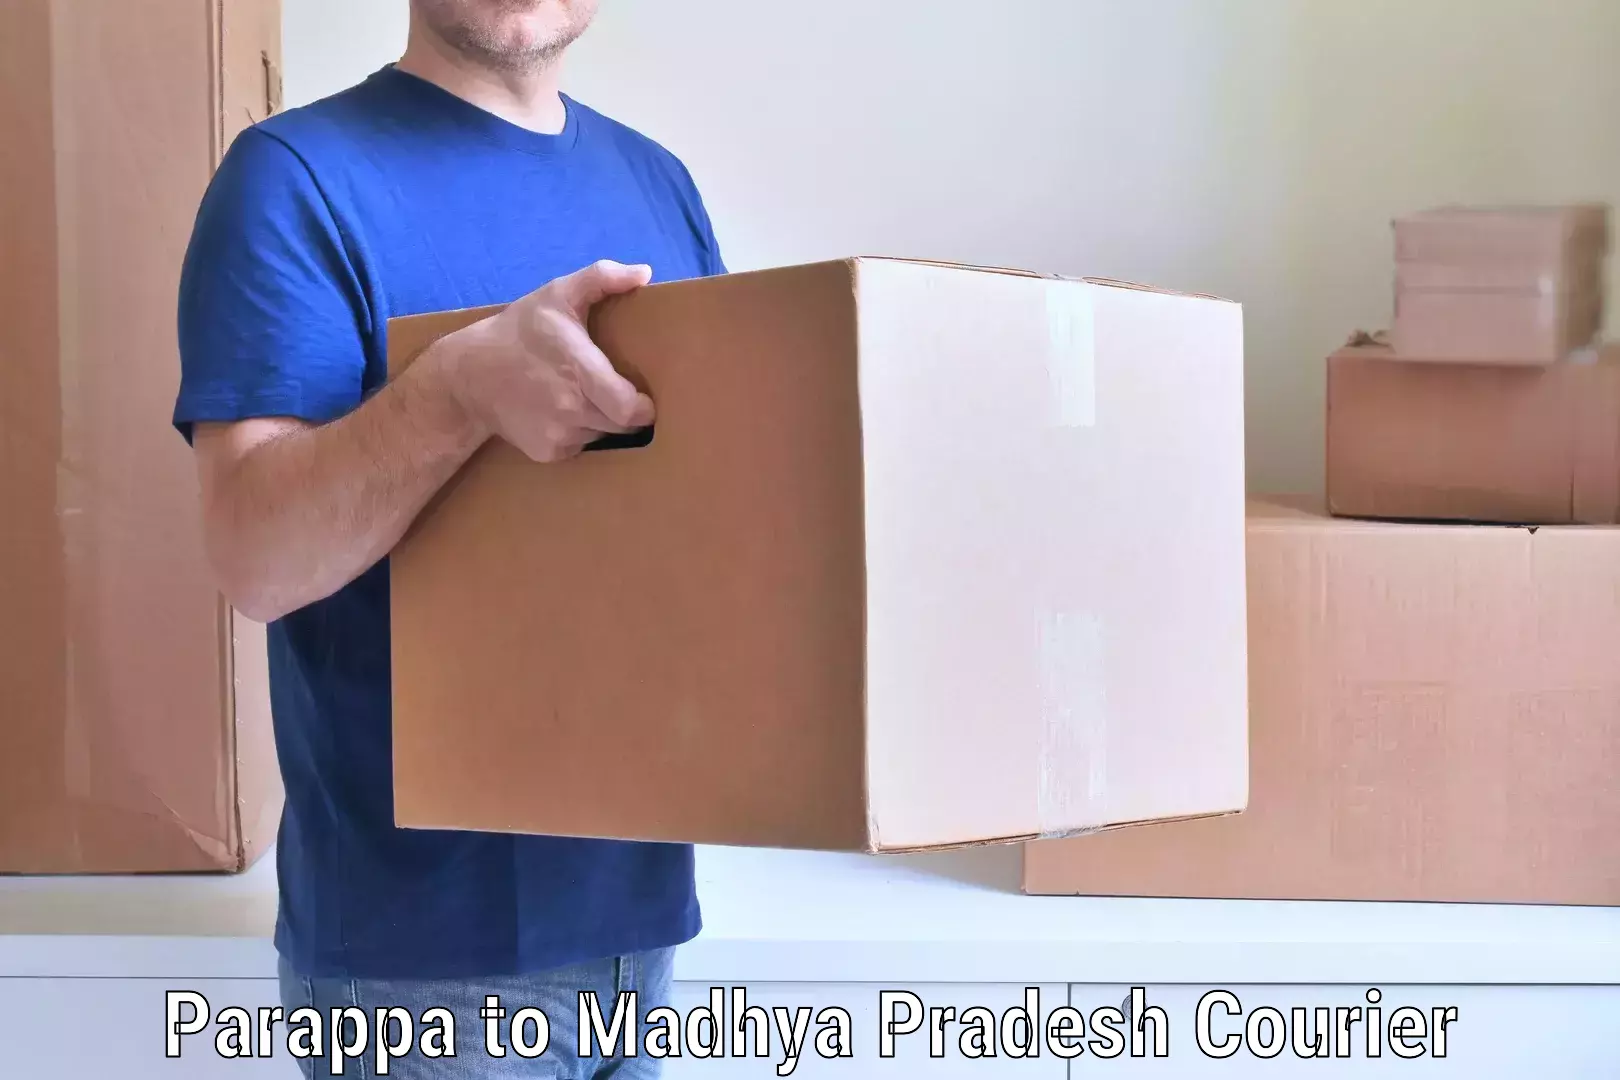 Moving and storage services Parappa to Khandwa